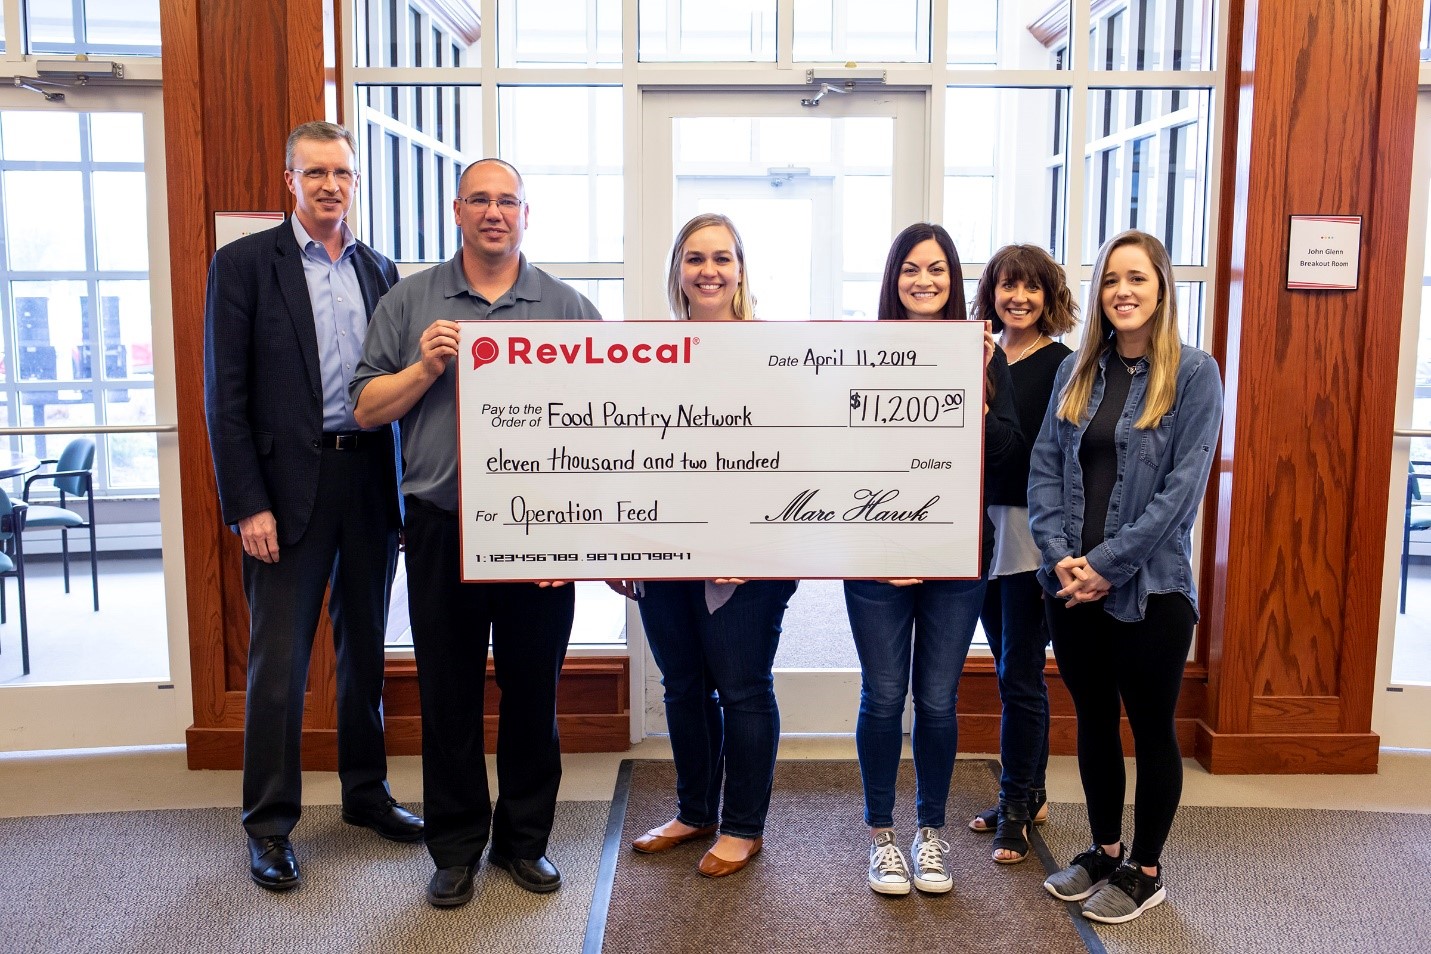 RevLocal employees award check to The Food Pantry Network of Licking County